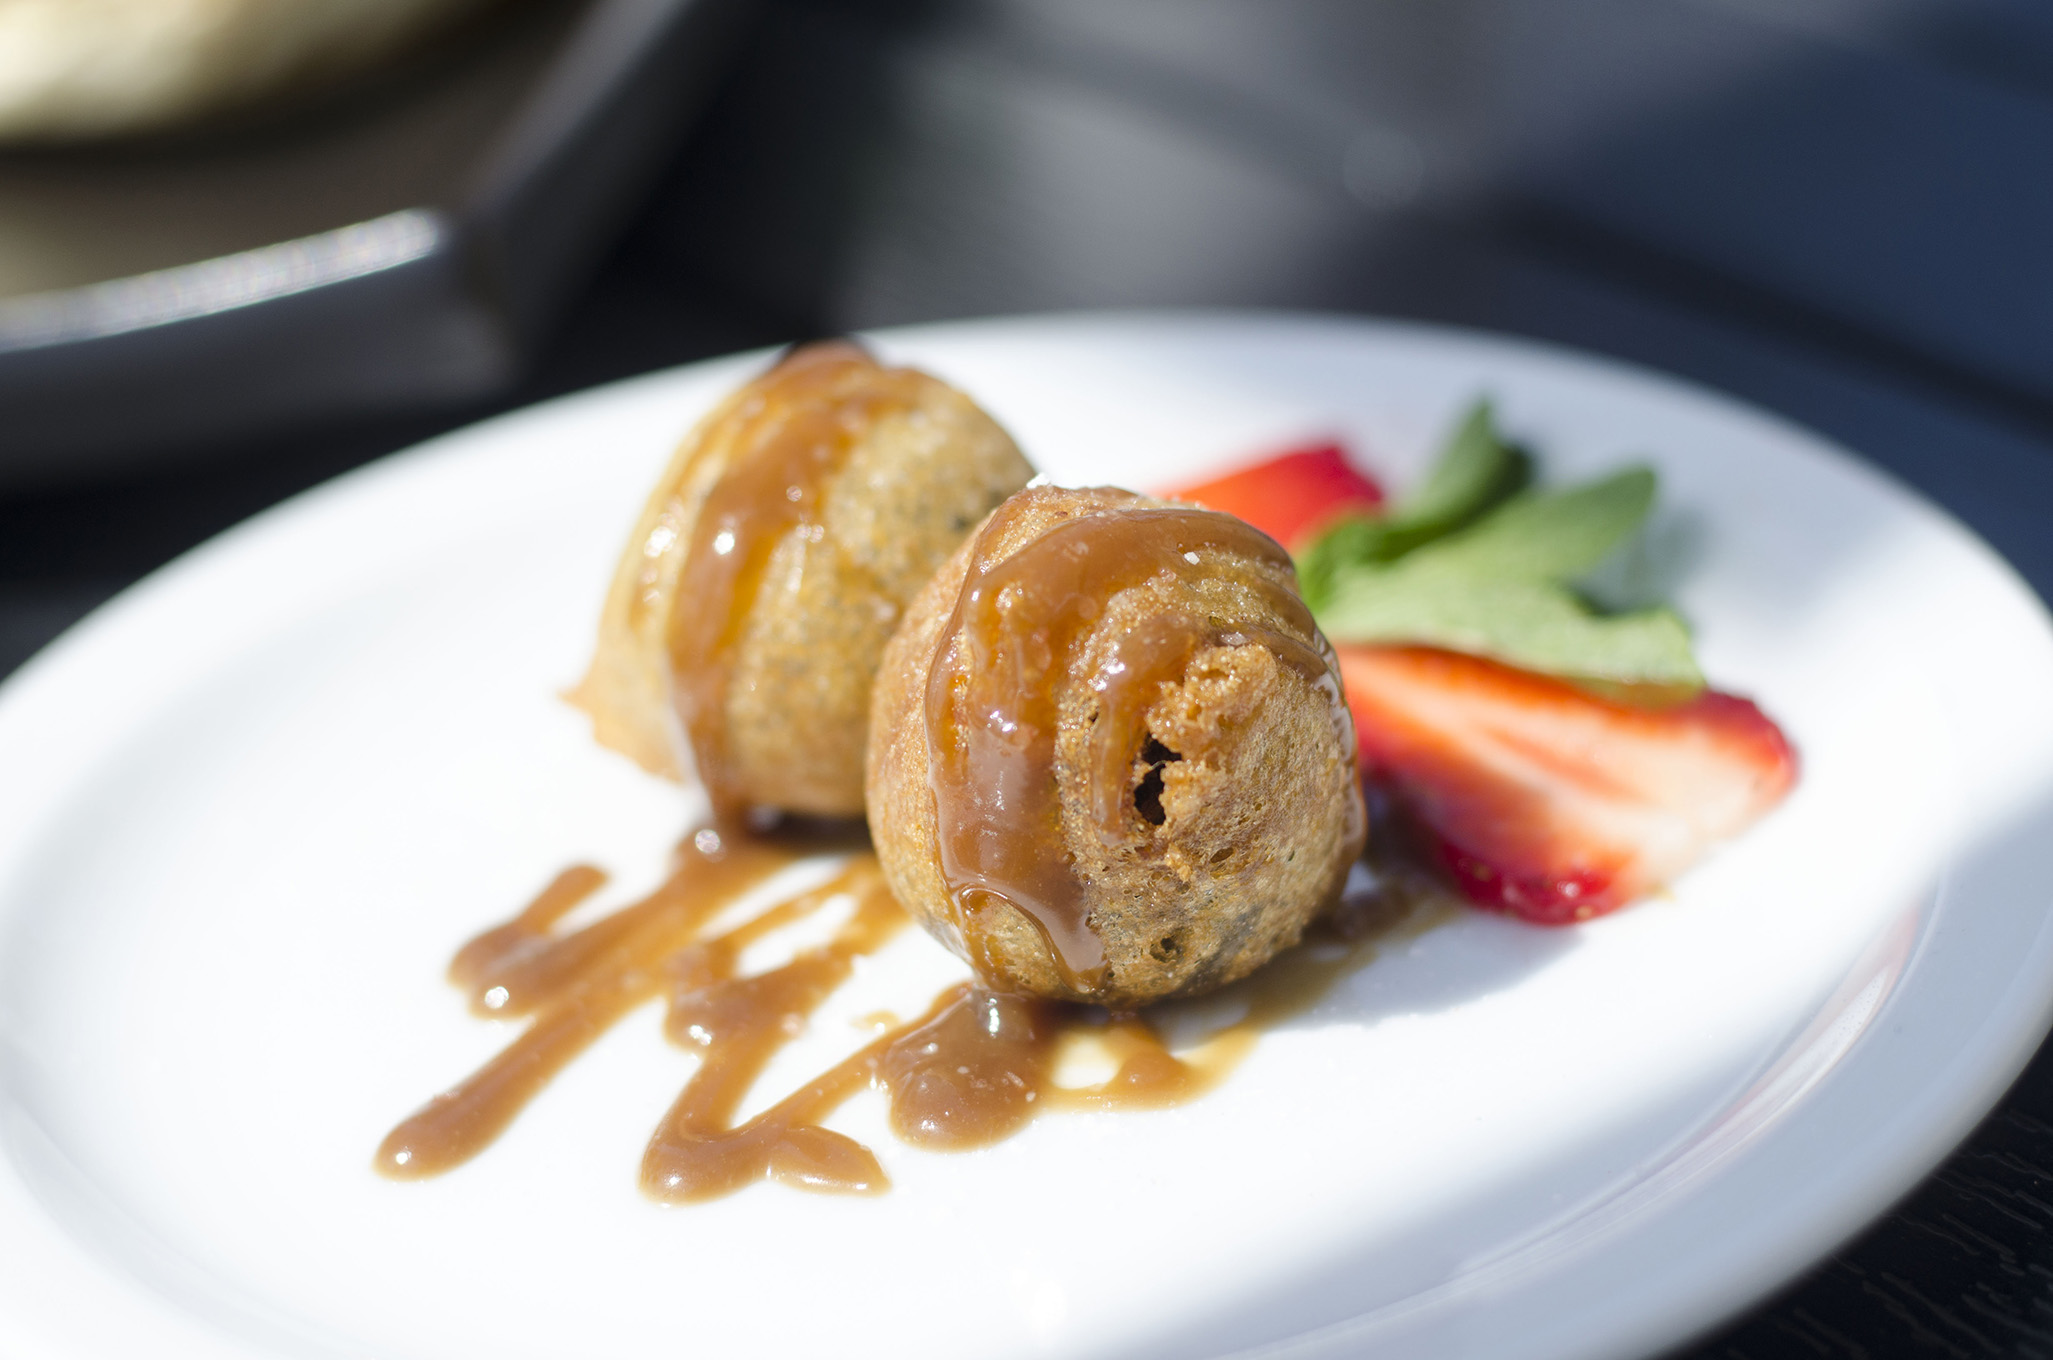 Deep Fried Brownie Bites with Stout Salted Caramel Sauce from the Joe Schmoe's GL Heritage Brewing dinner on June 18, 2019.